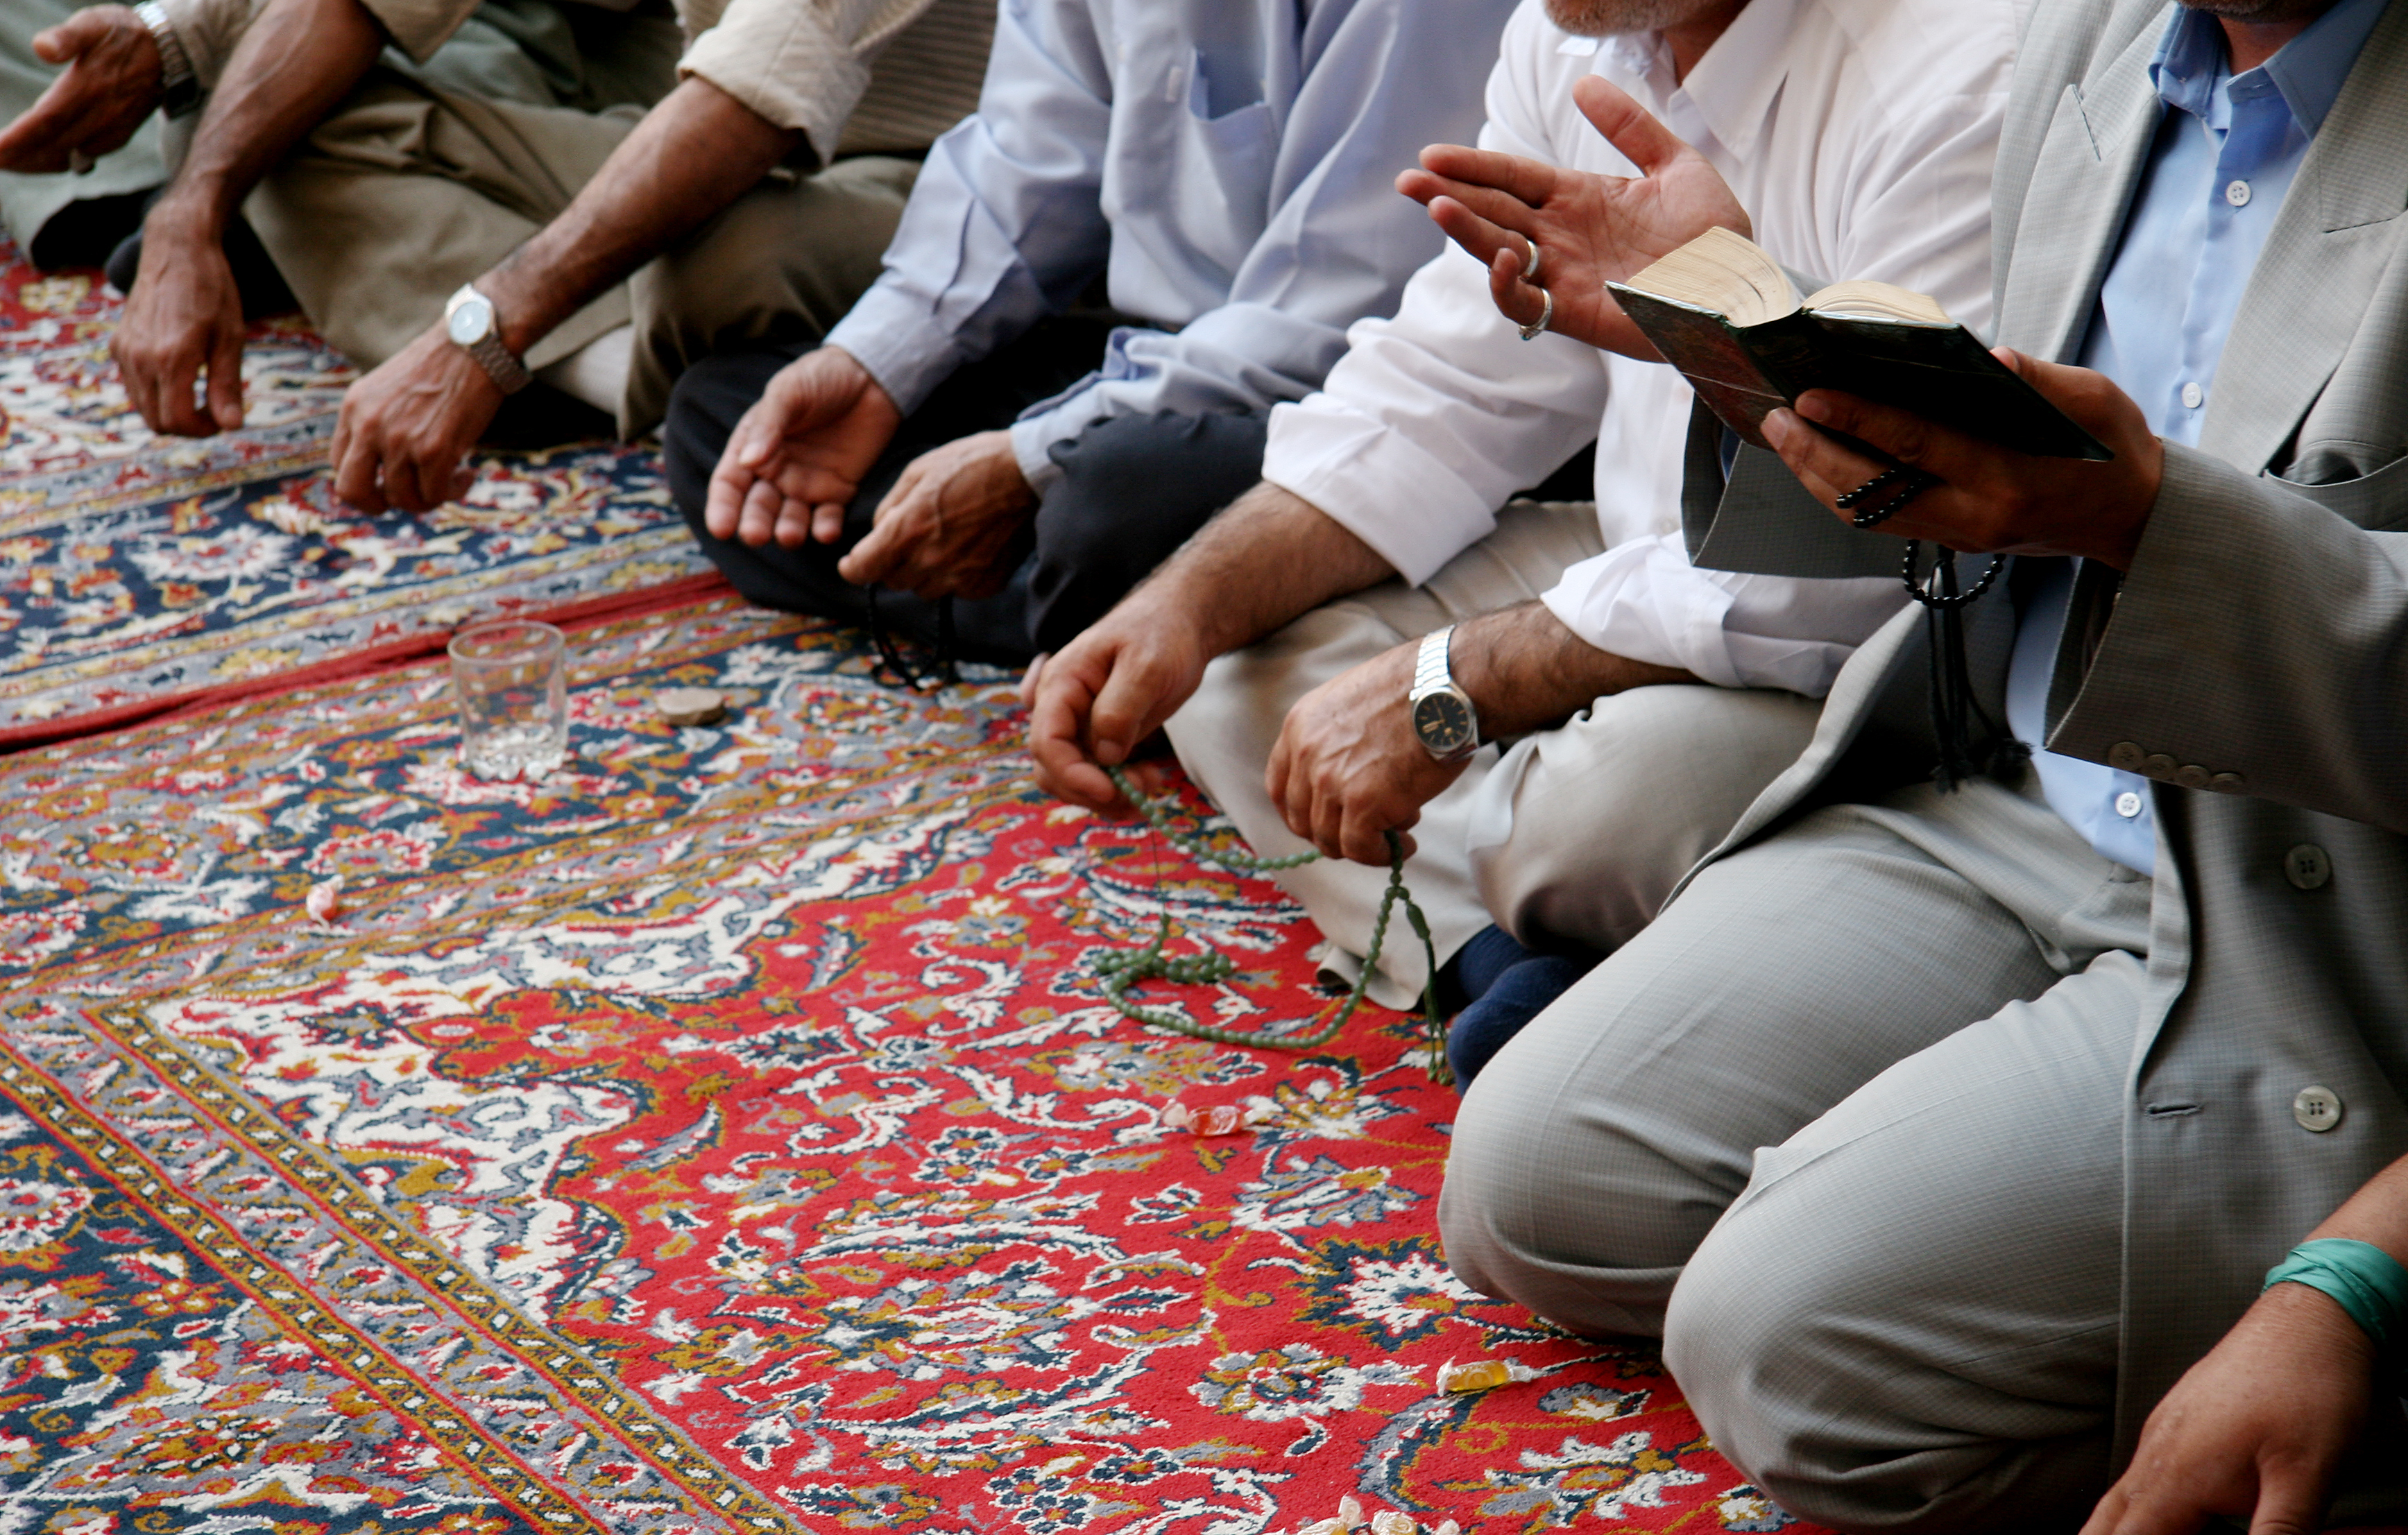 Muslims praying in a mosque | Source: Getty Images